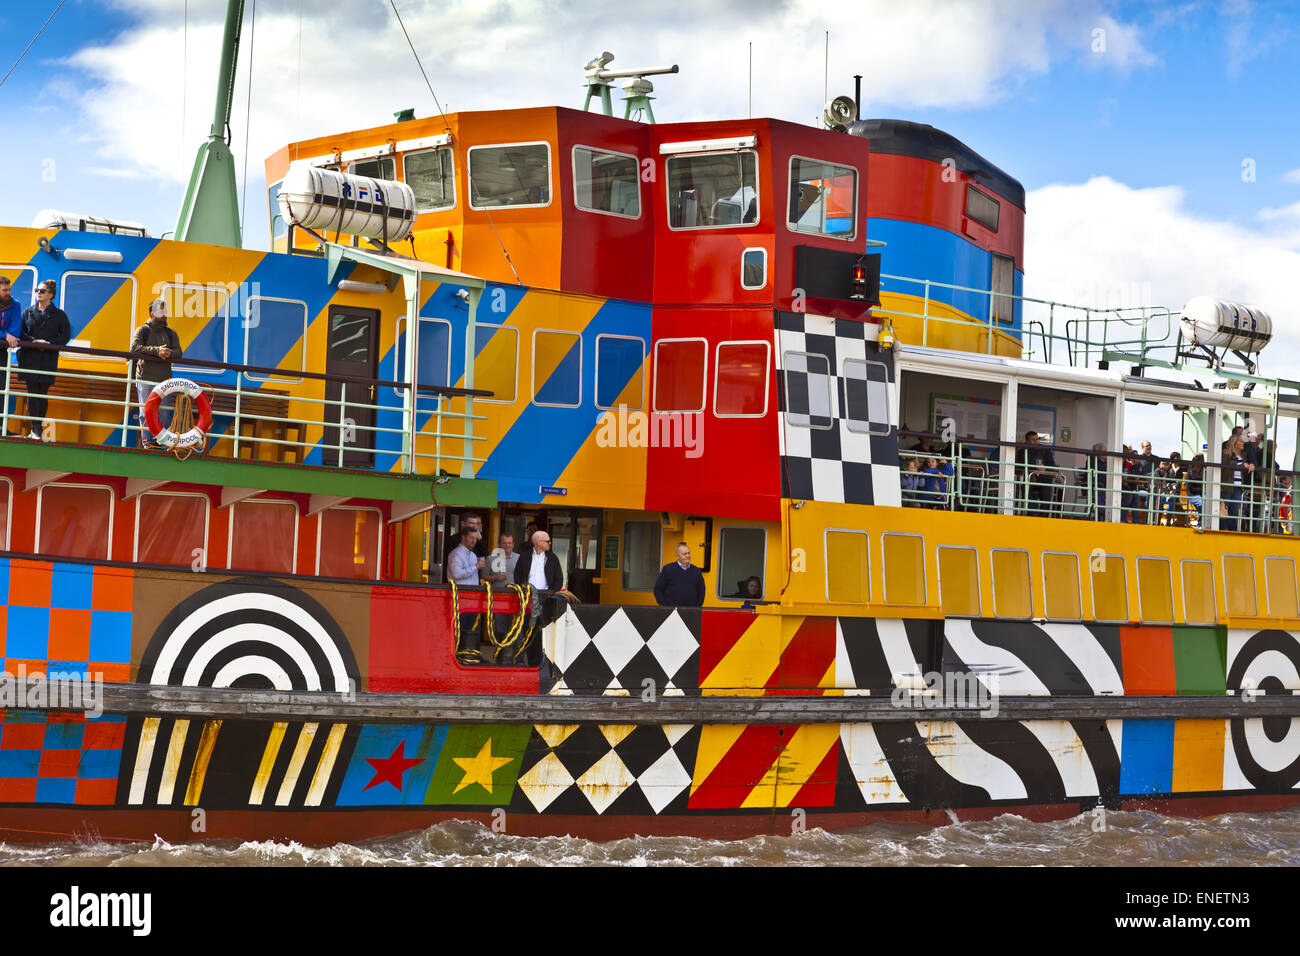 The Mersey ferry Snowdrop with its new ‘dazzle’ paintjob created by Sir Peter Blake in homage to the 1st World War's camouflage. Stock Photo